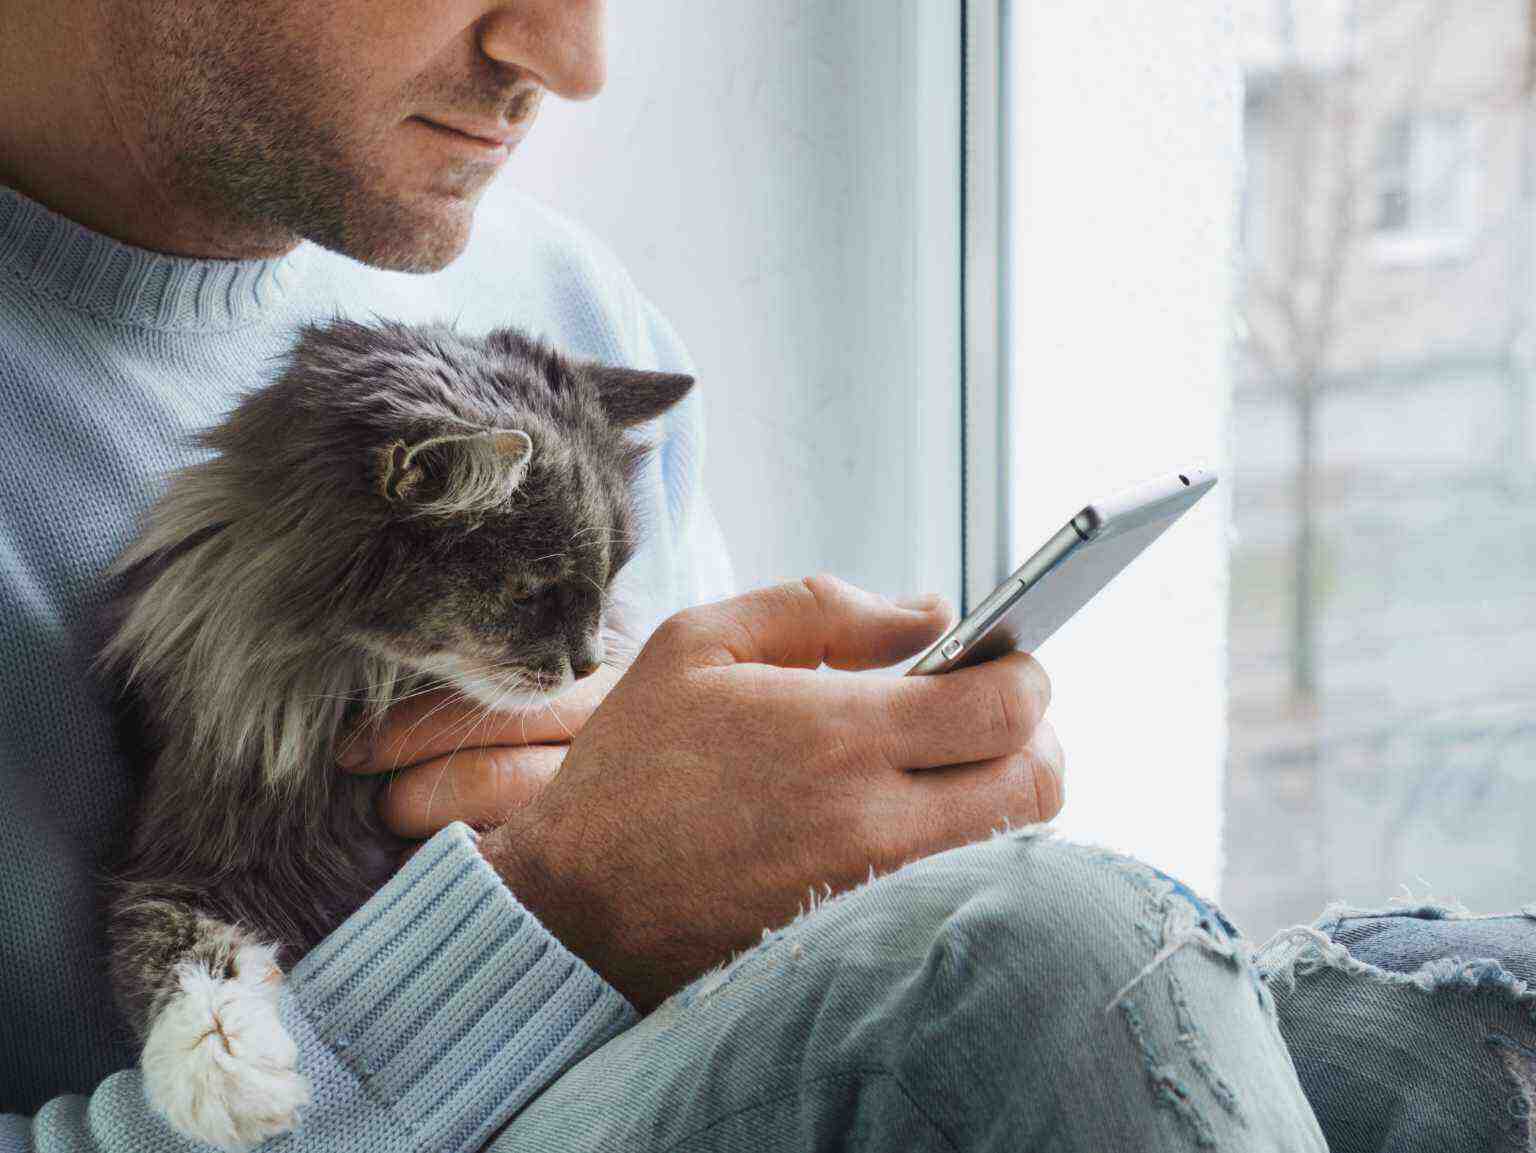 A man holds his cat while reading on his smart phone in front of a window.